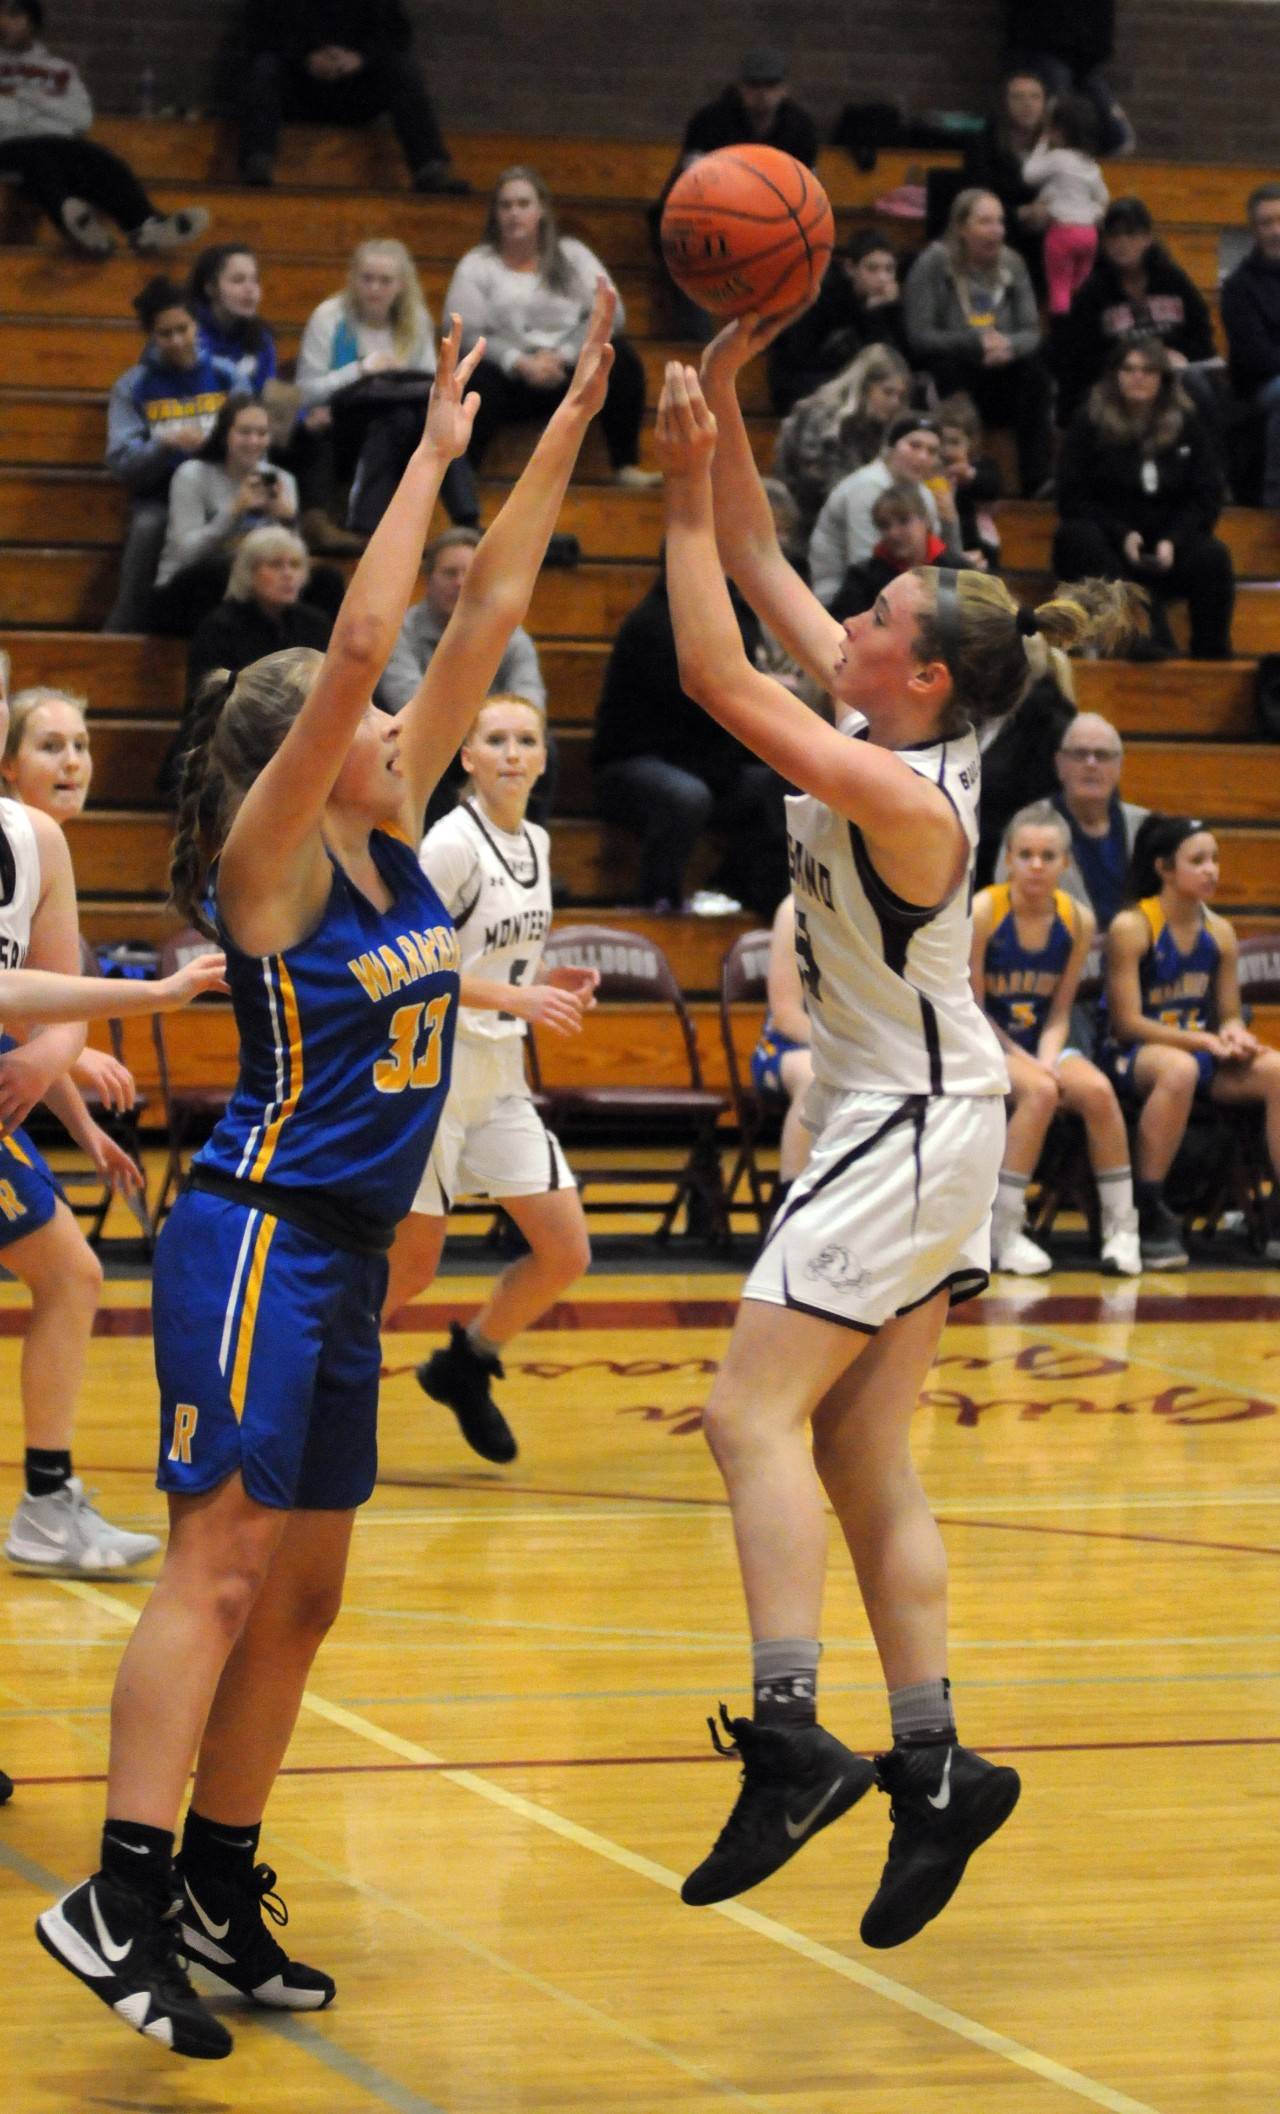 Monte’s Paige Lisherness, right, puts up a jump shot over Rochester’s Emily Elkins in the Bulldogs’ overtime loss on Tuesday in Montesano. (Ryan Sparks | Grays Harbor News Group)